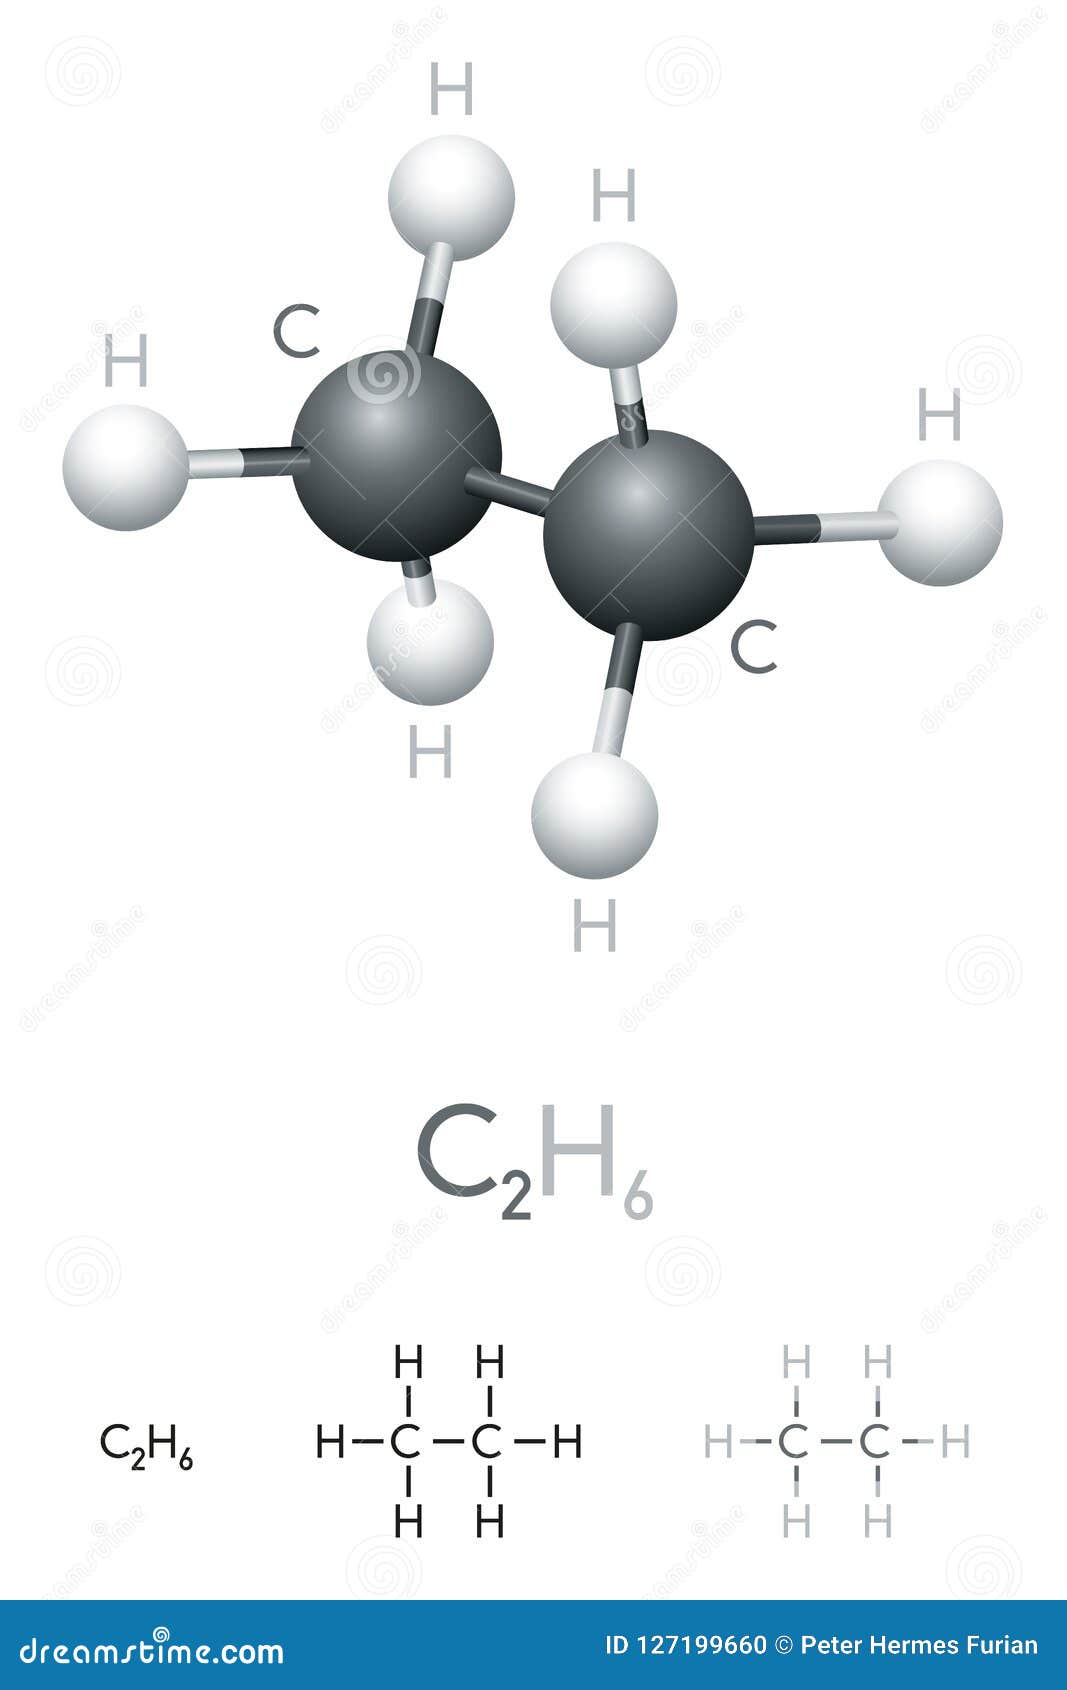 Ethane, C2H6, Molecule Model and Chemical Formula Stock Vector ...